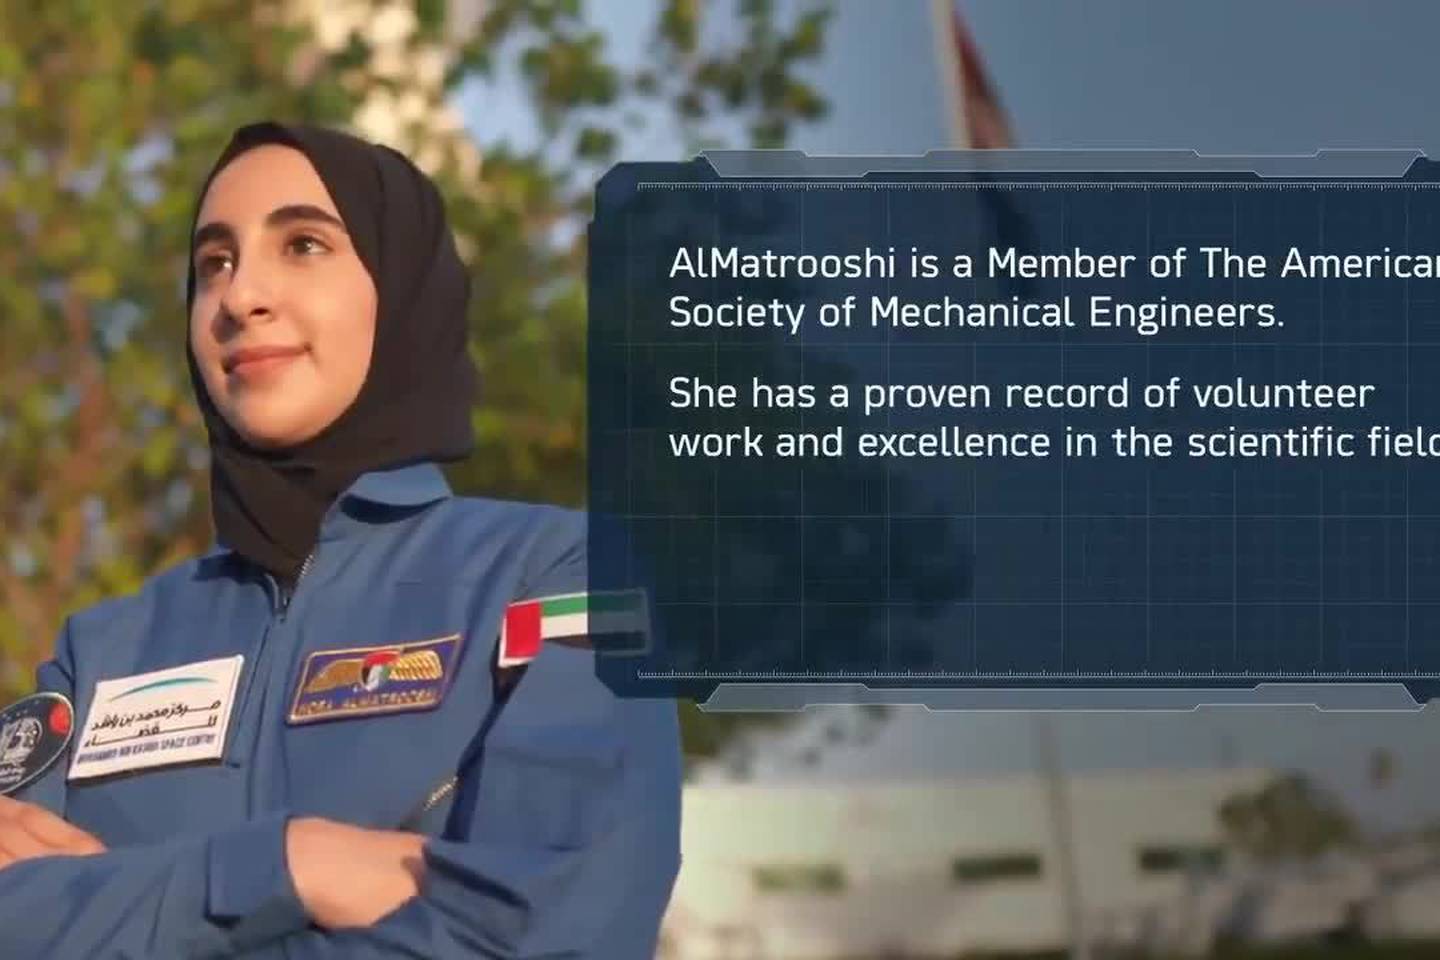 The Arab World’s first woman astronaut